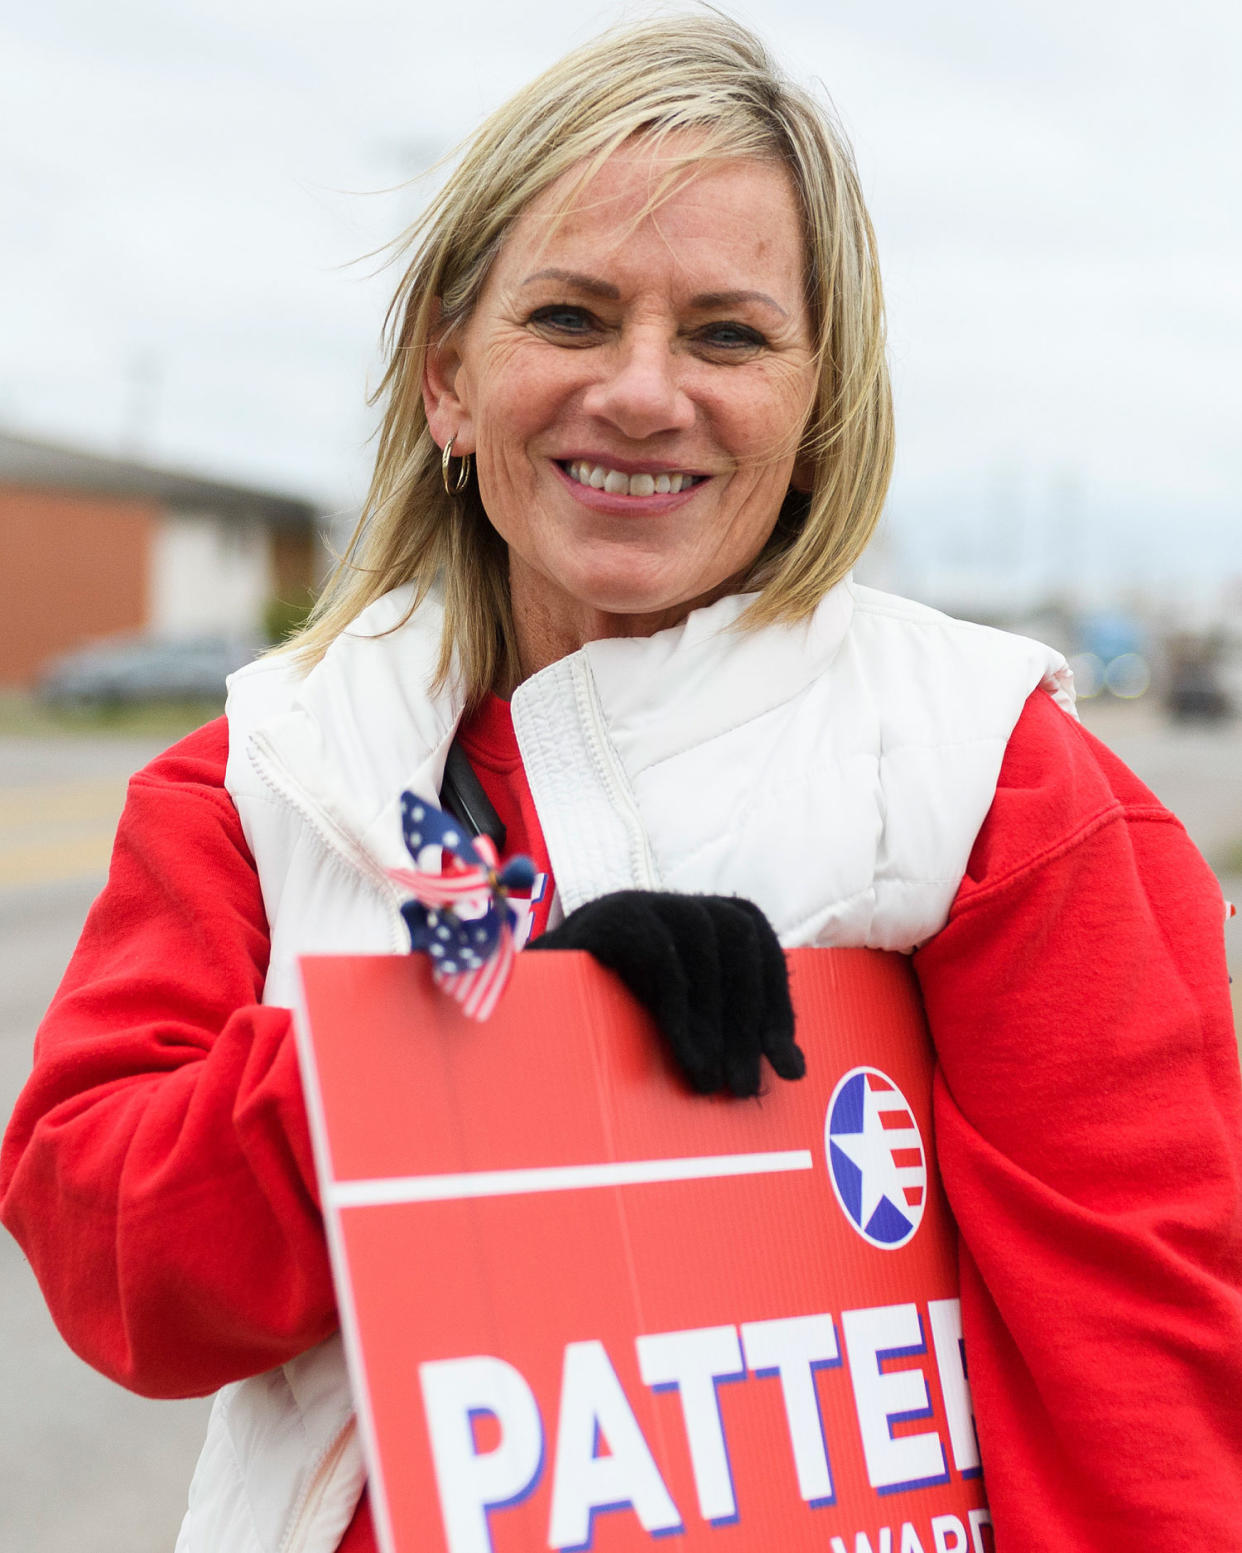 Candidate Cheryl Patterson poses for a portrait (Michael Noble Jr. for NBC News)